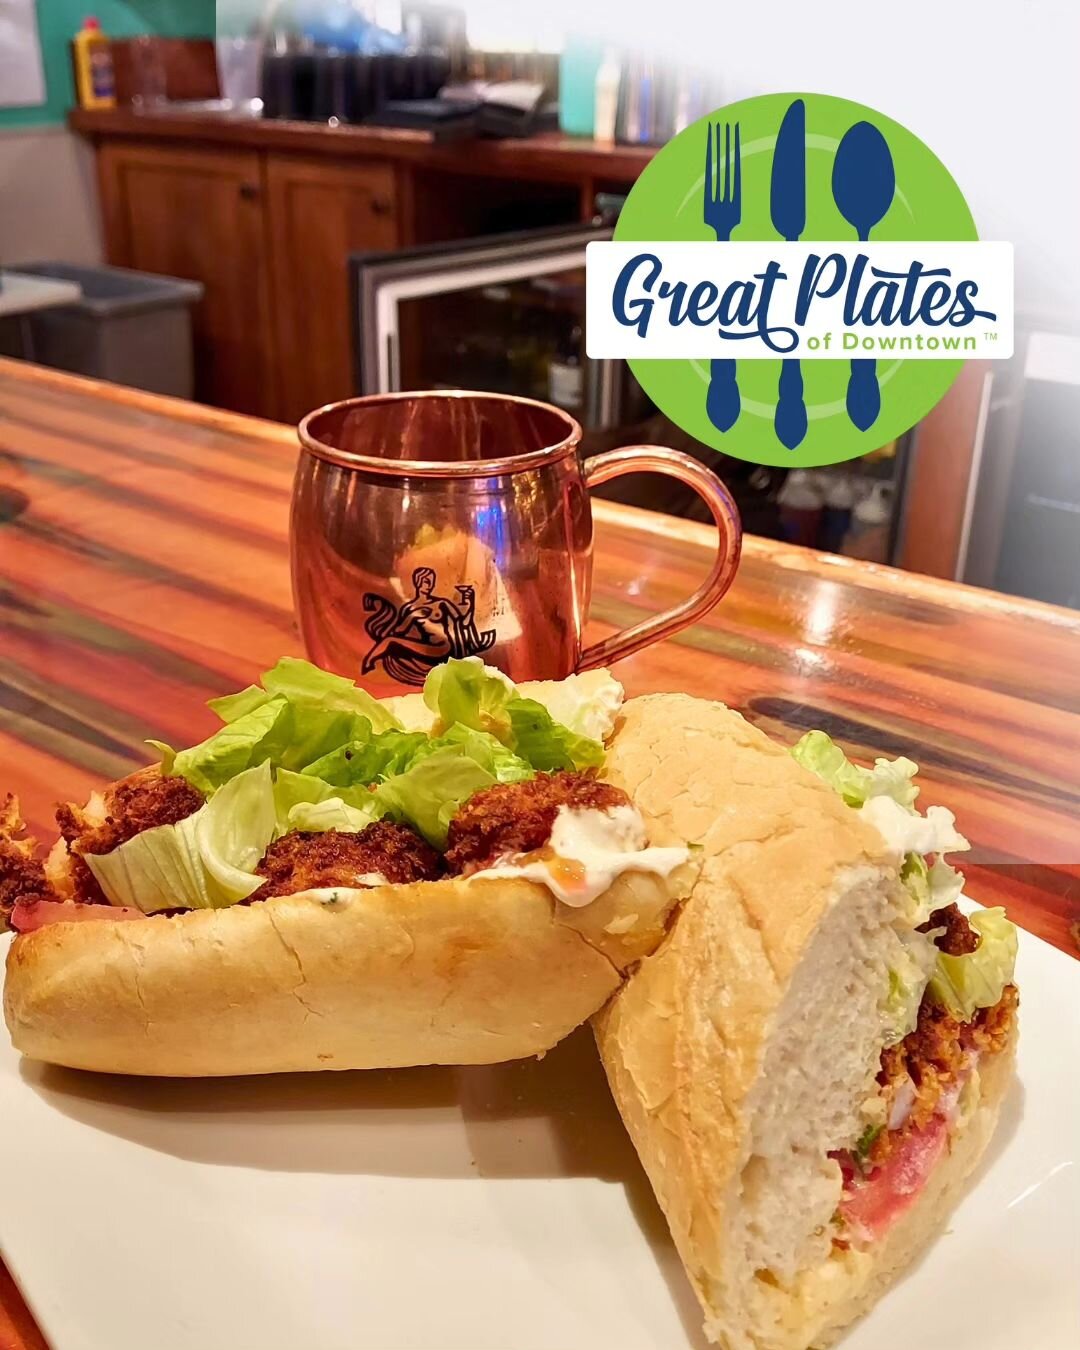 There's still time to chow down for a good cause! 

We're offering a Shrimp Po' Boy, shareable Crawfish Fondue, as well as TWO hand-crafted cocktails from our regular menu for $35! 

#foco #noco #greatplates #downtownfortcollins #visitfortcollins #su